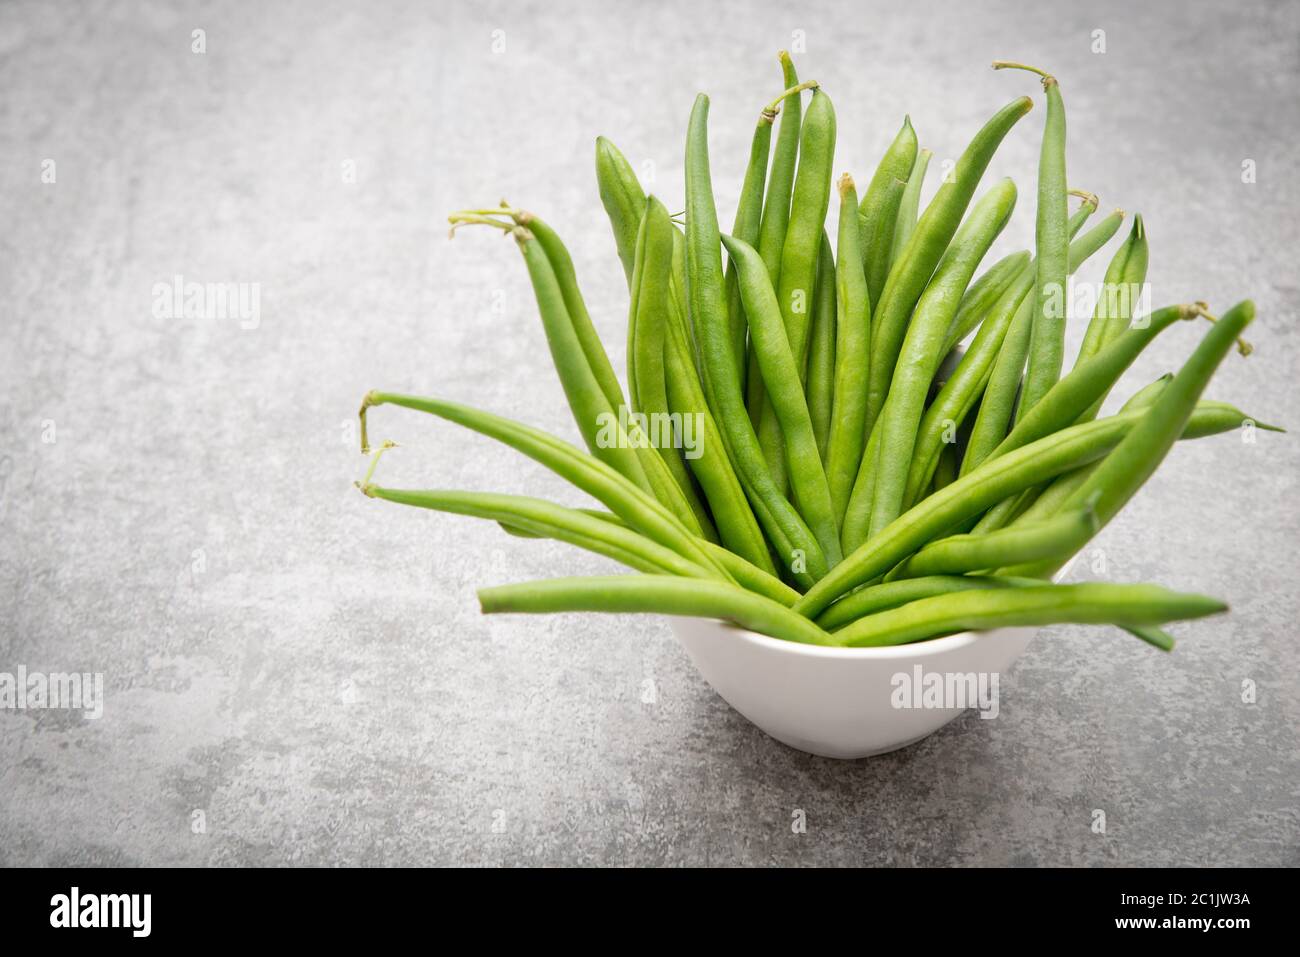 Fresh green string beans on a plate on grey structured background. Stock Photo